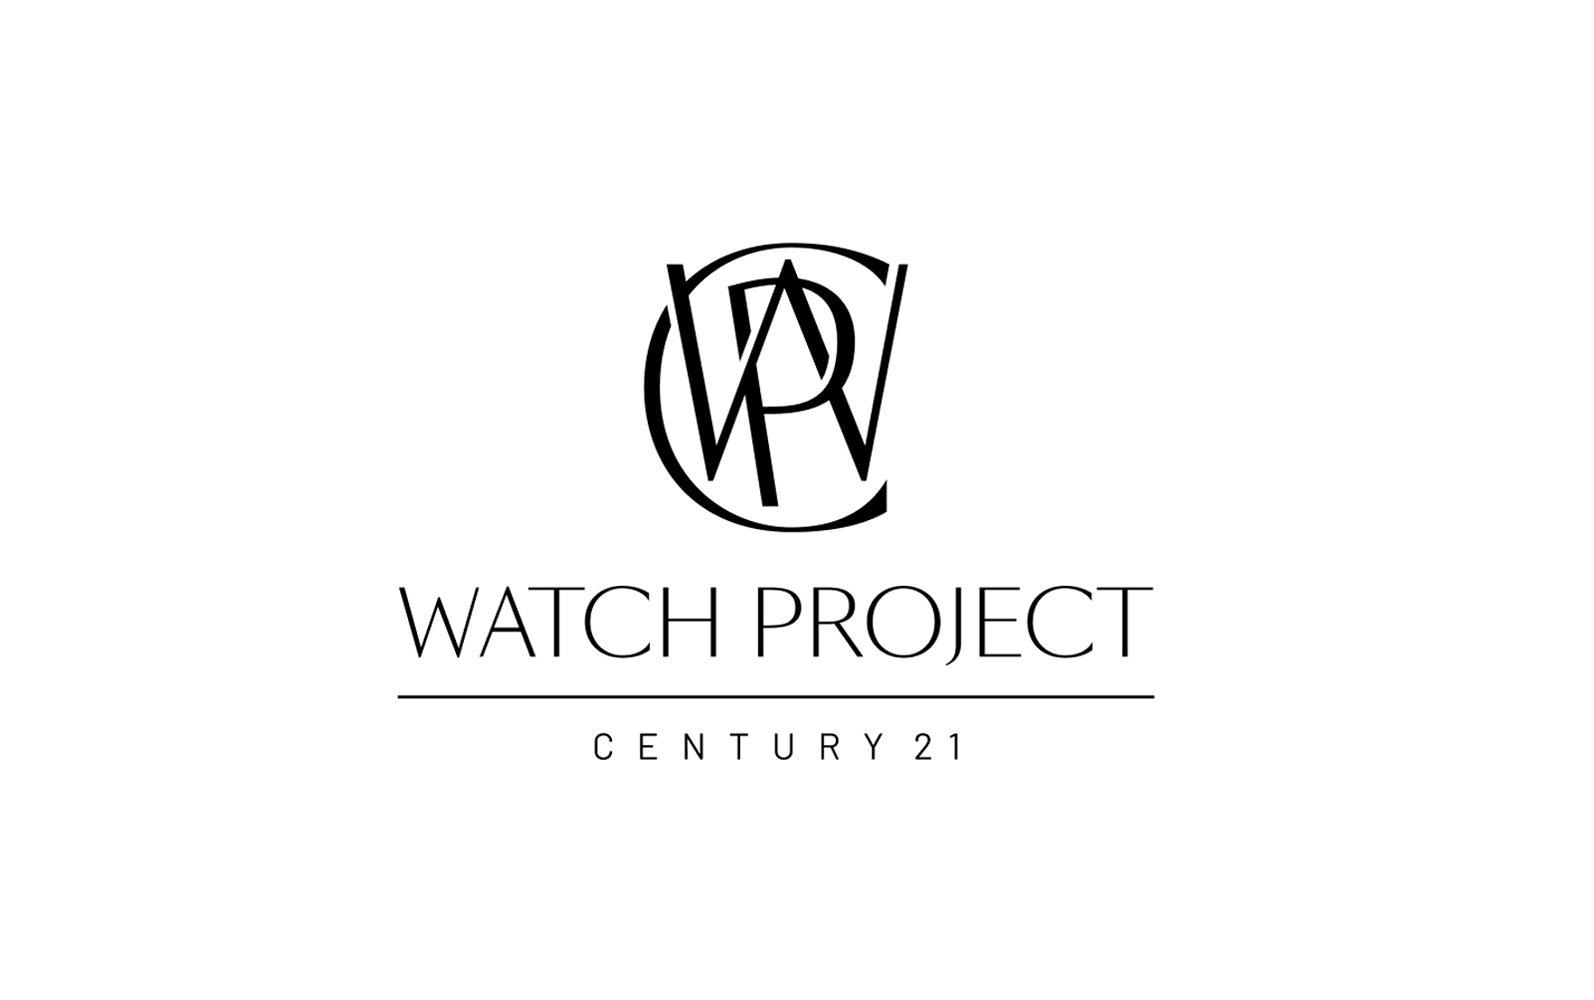 Watchproject 21 